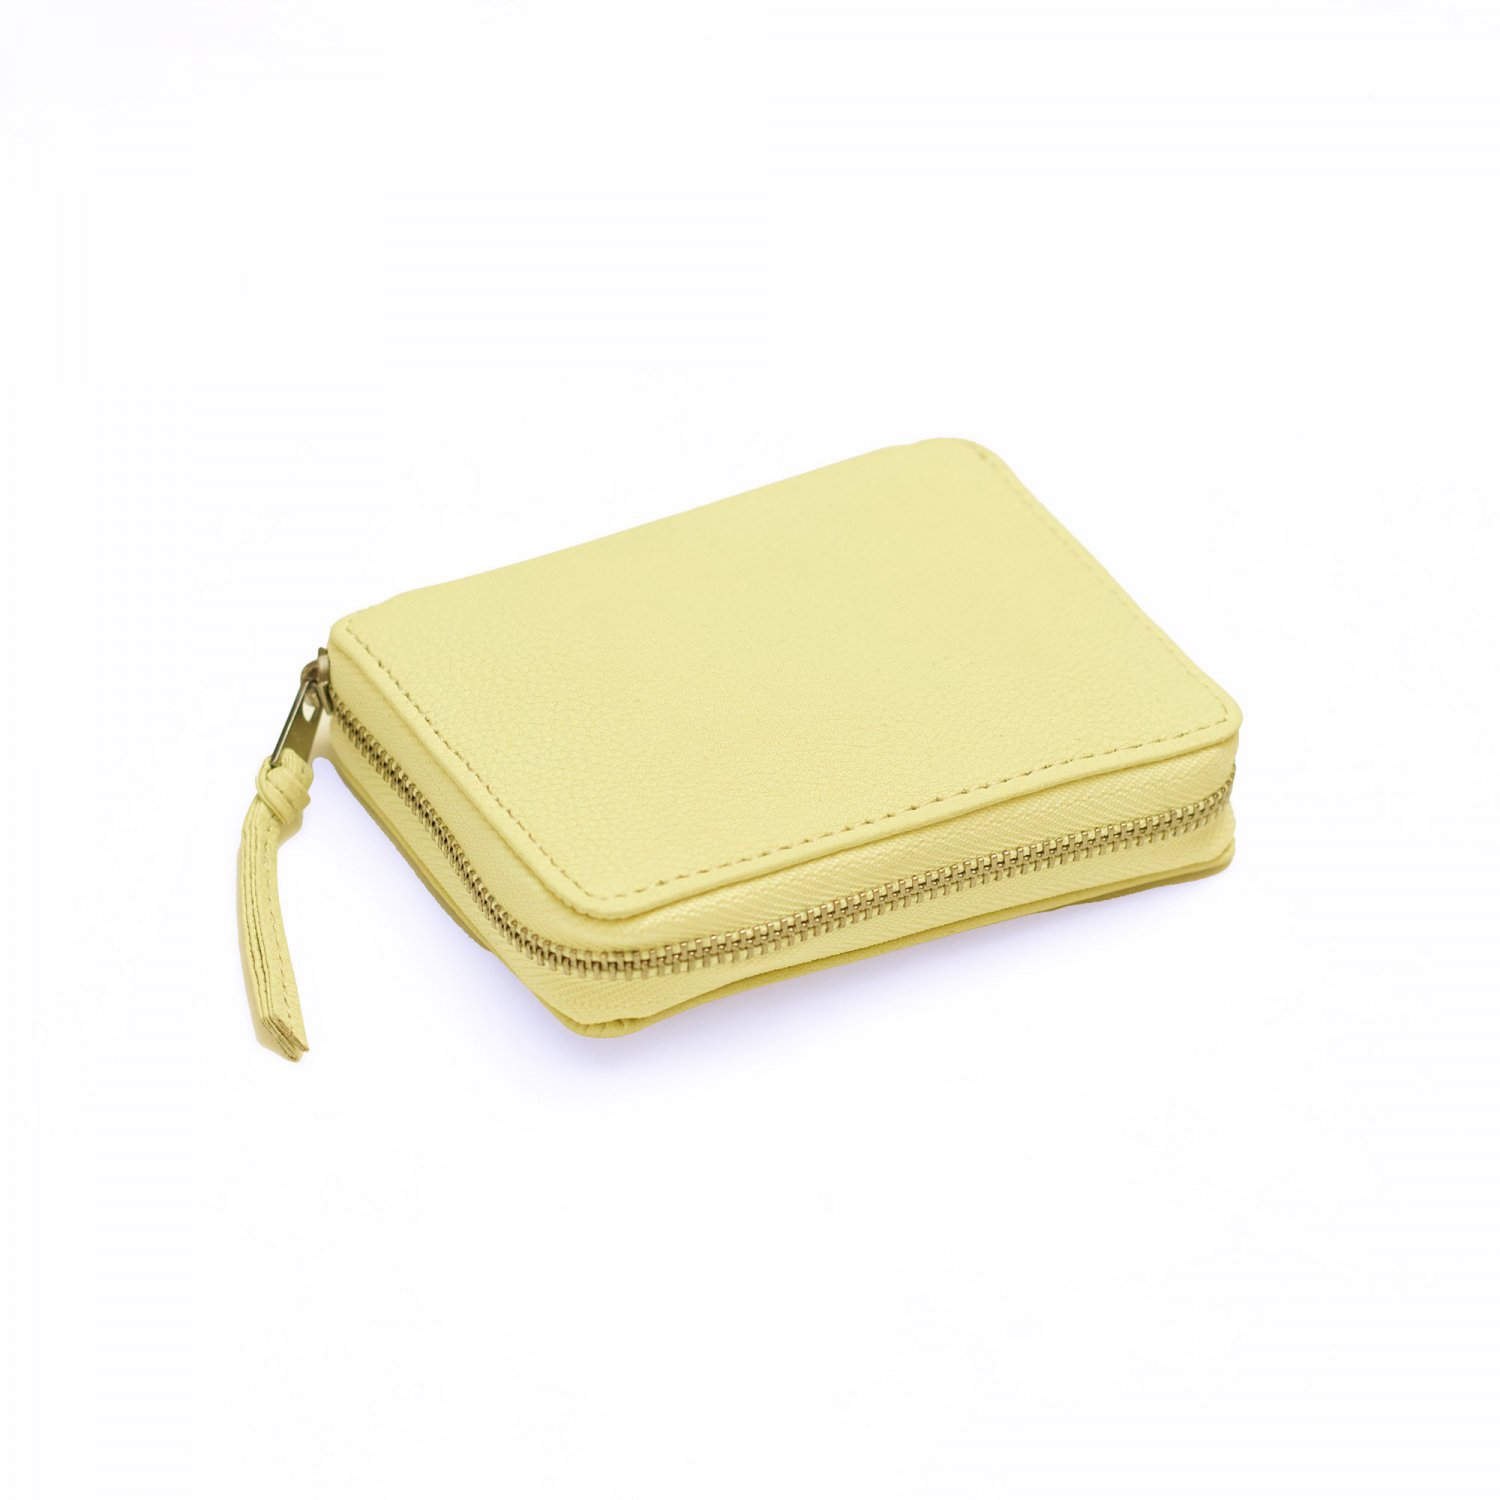 <img class='new_mark_img1' src='https://img.shop-pro.jp/img/new/icons8.gif' style='border:none;display:inline;margin:0px;padding:0px;width:auto;' />ERA <br />BUBBLE CALF ROUND PALM WALLET